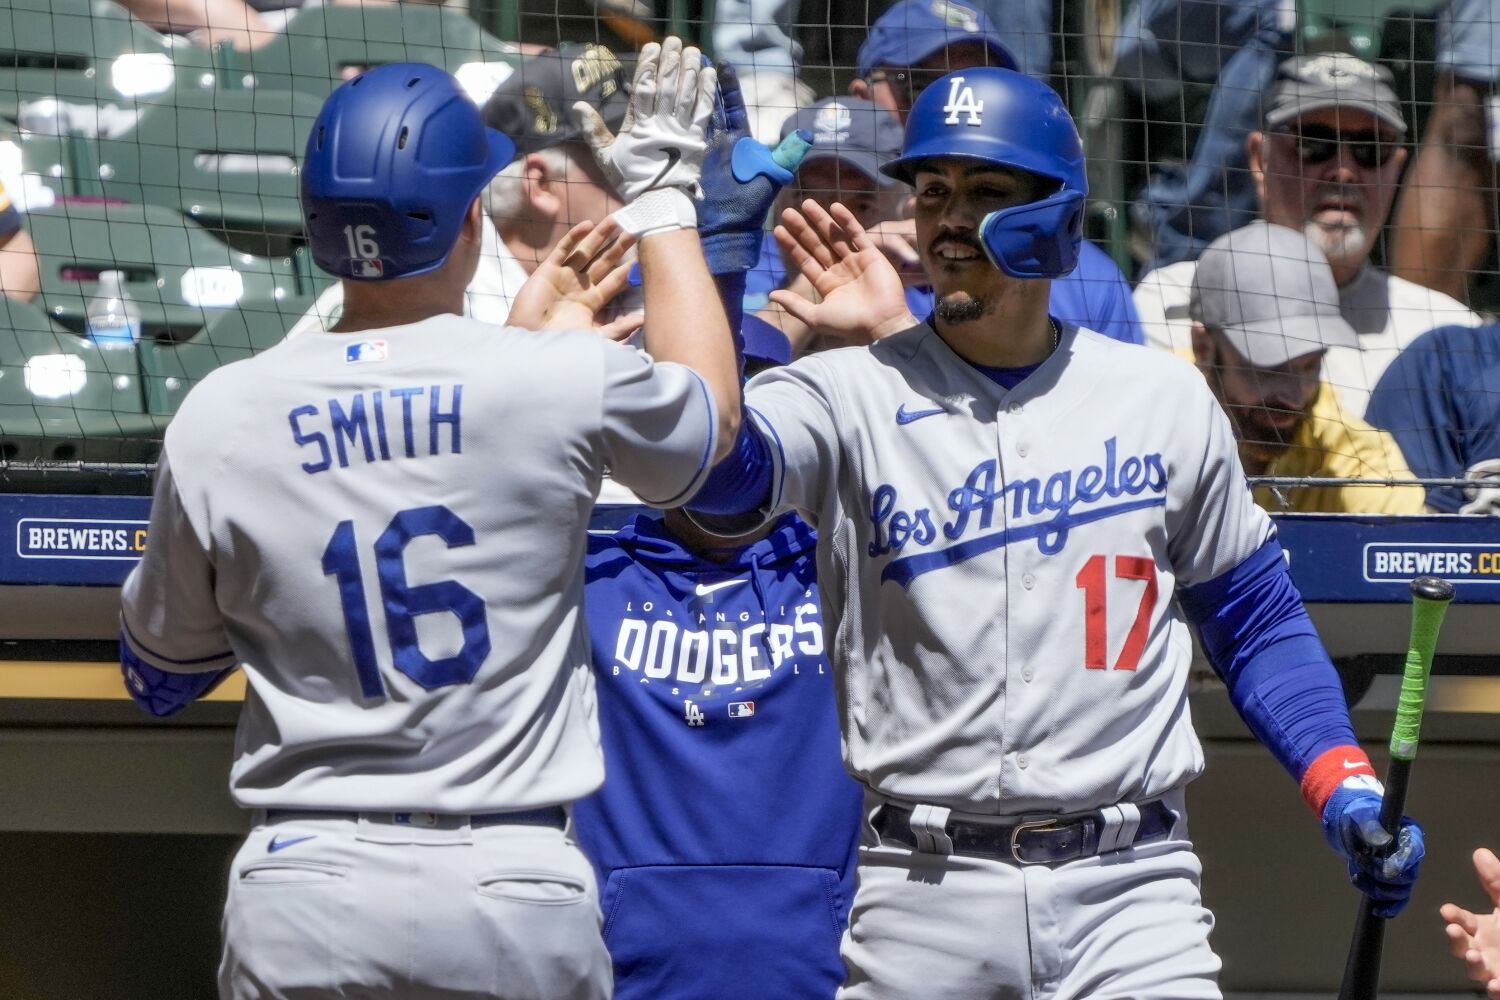 Dodgers vs. San Diego Padres: How to watch, start times and betting odds